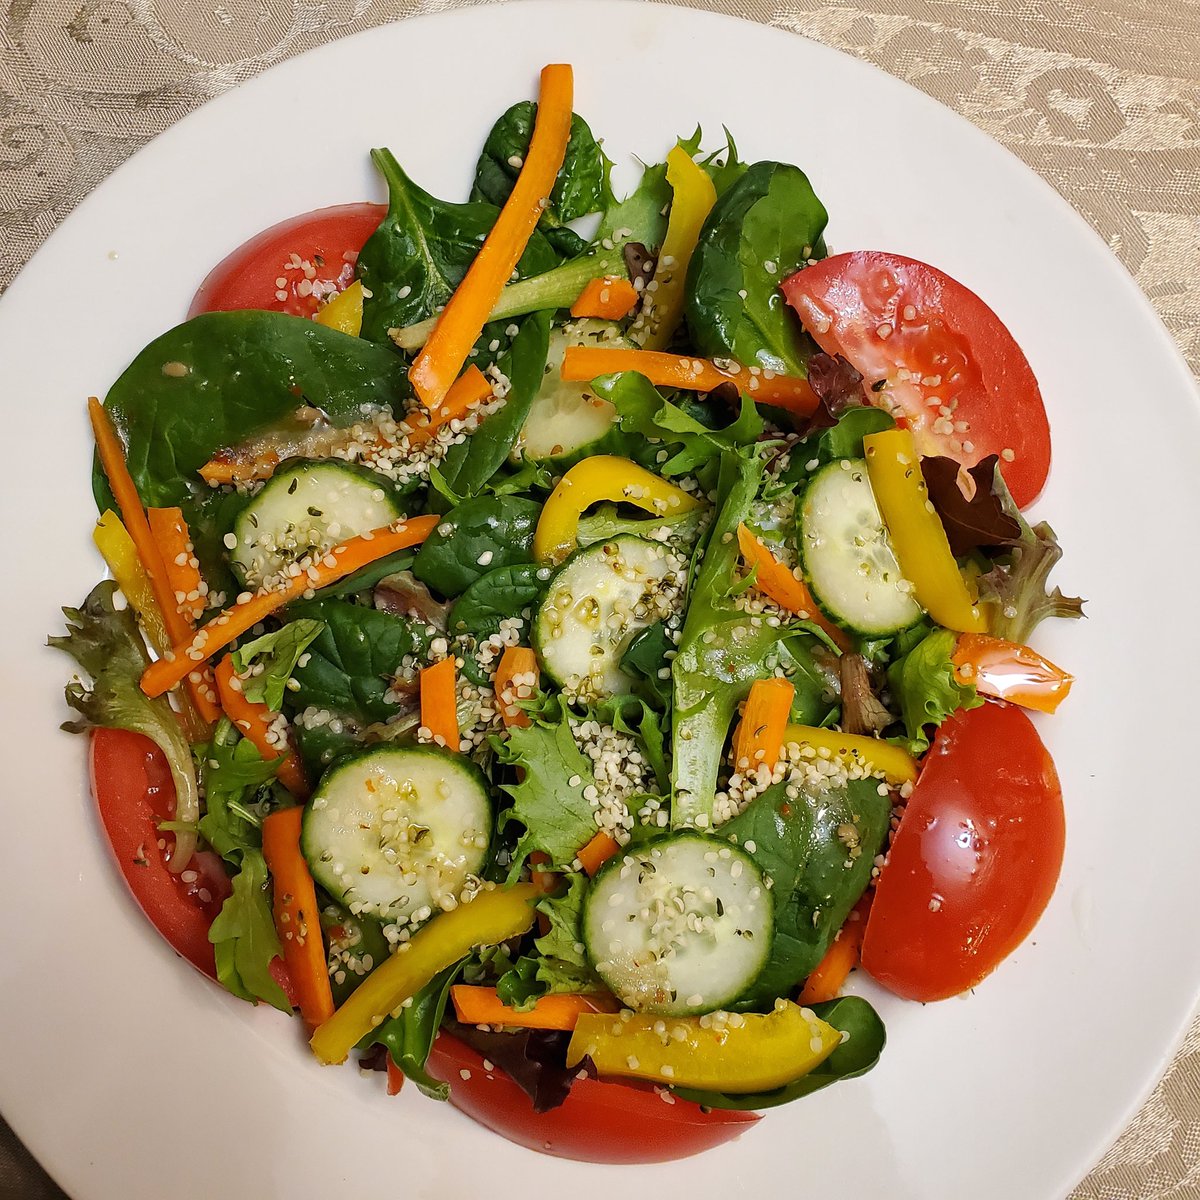 #CBDChallenge DAY 31! The final day!!! Salad time with spring mix, spinach, cucumbers, carrots, bell pepper, tomato, hemp seeds, + zesty Italian dressing mixed with MOOD RING CBD INFUSED EXTRA VIRGIN OLIVE OILLLLL!!!! @mercarilife #challengecomplete #wheresmtrophy 🏆🏆🏆